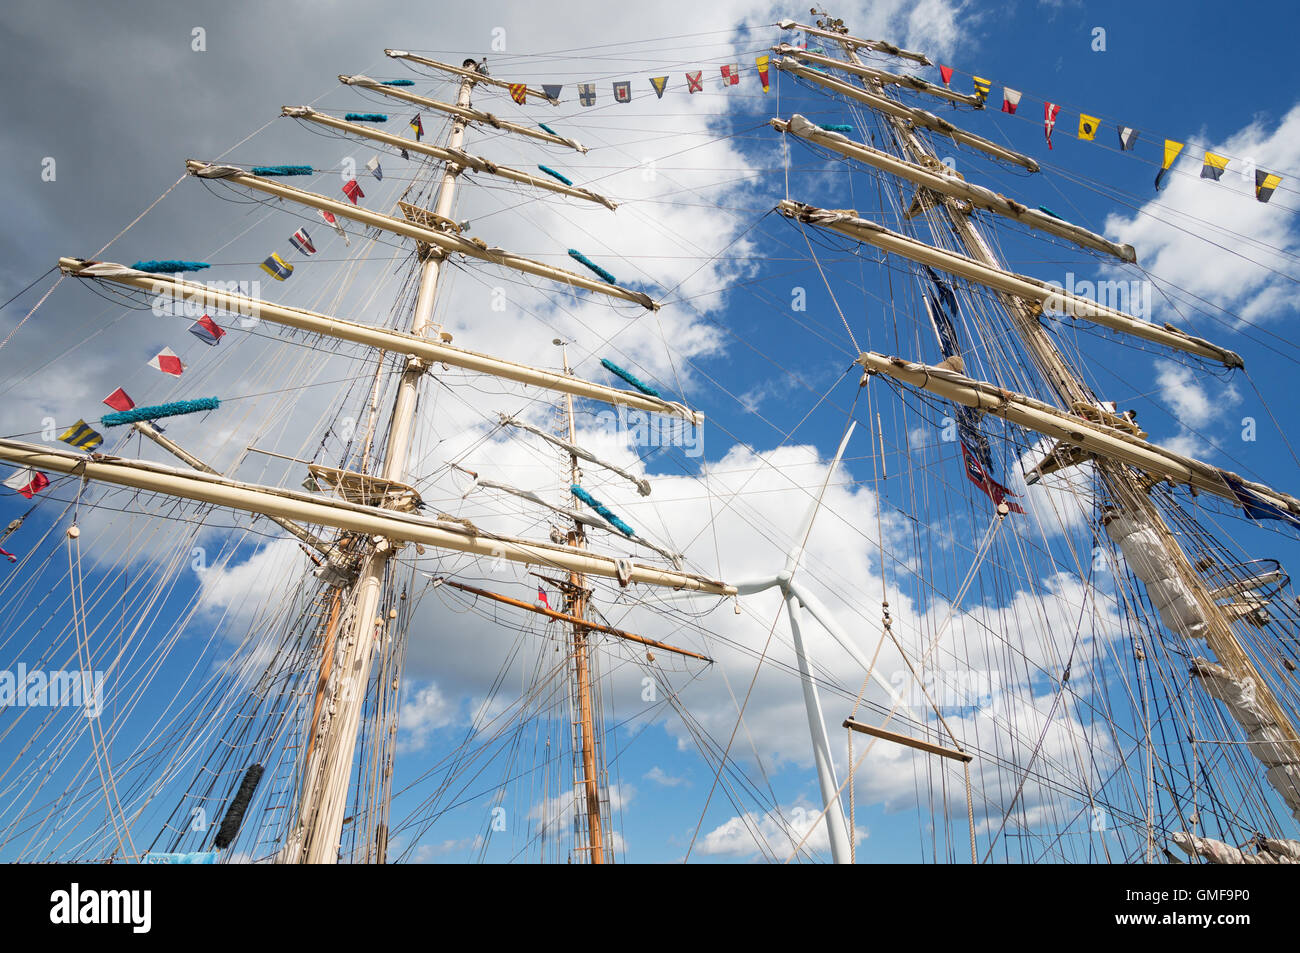 Blyth, UK. 26th Aug, 2016. Tall ships moored in the the Port of Blyth in Northumberland. Masts of the Polish tarining ship Dar Młodzieży in the foreground with an example of modern wind power behind  Credit:  Washington Imaging/Alamy Live News Stock Photo